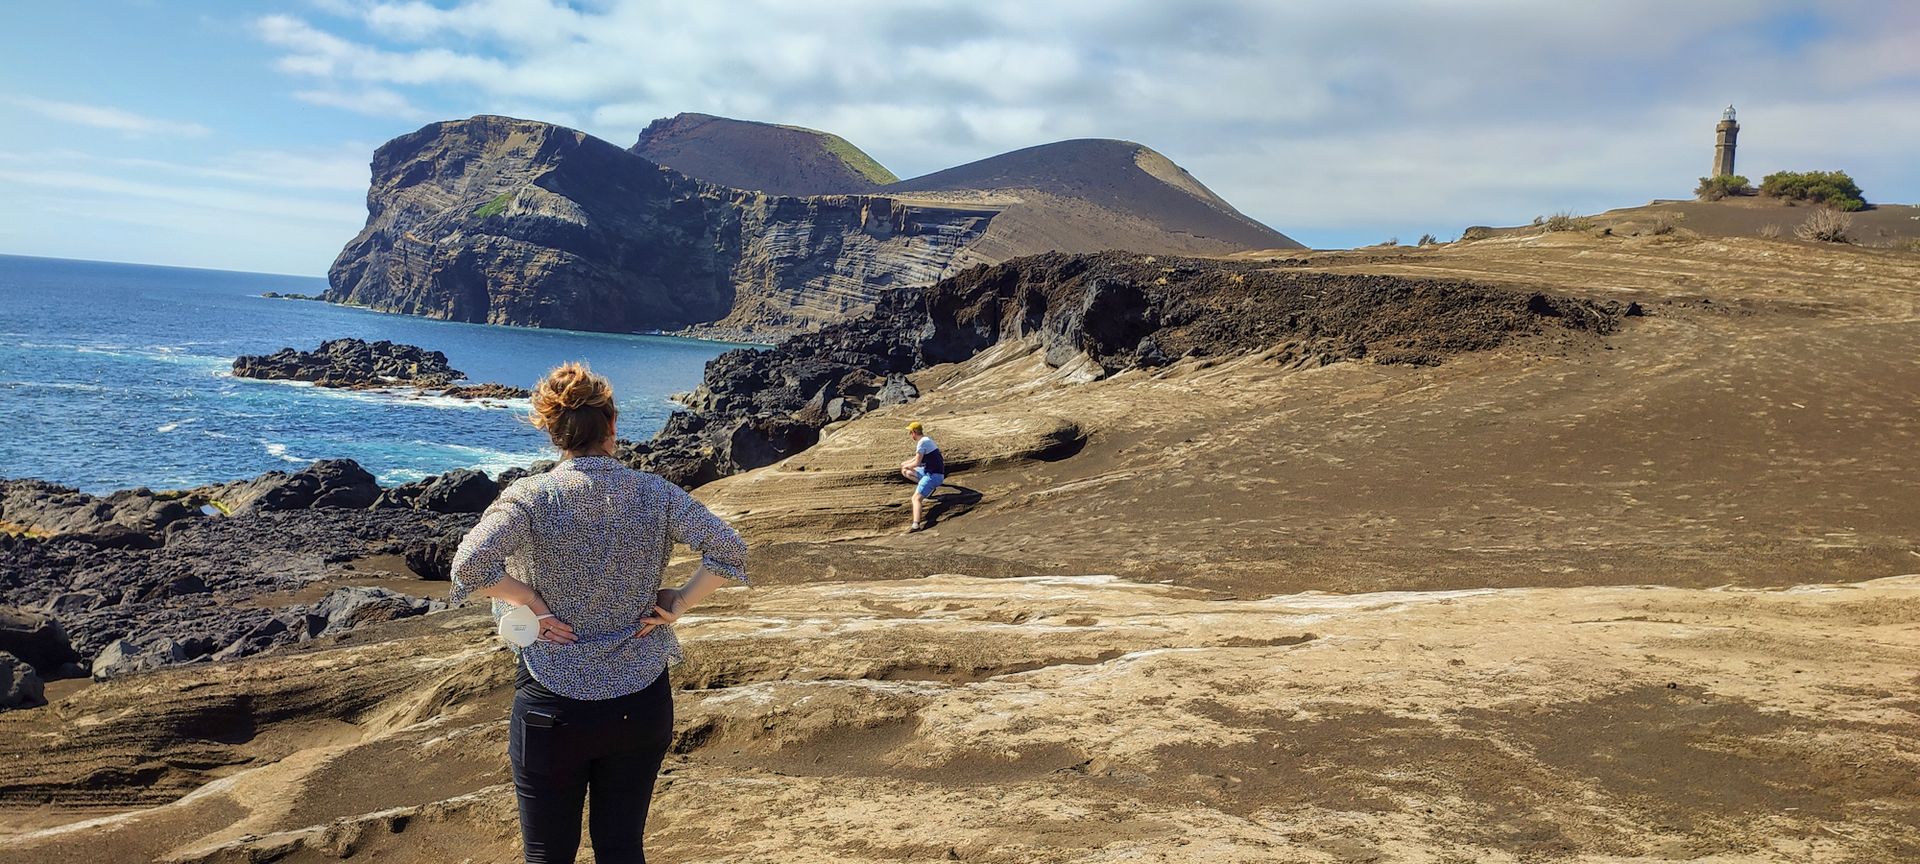 Visit the Capelinhos Volcano on our full-day Excursions, Tours and Guided Visits on the island of Faial Azores.